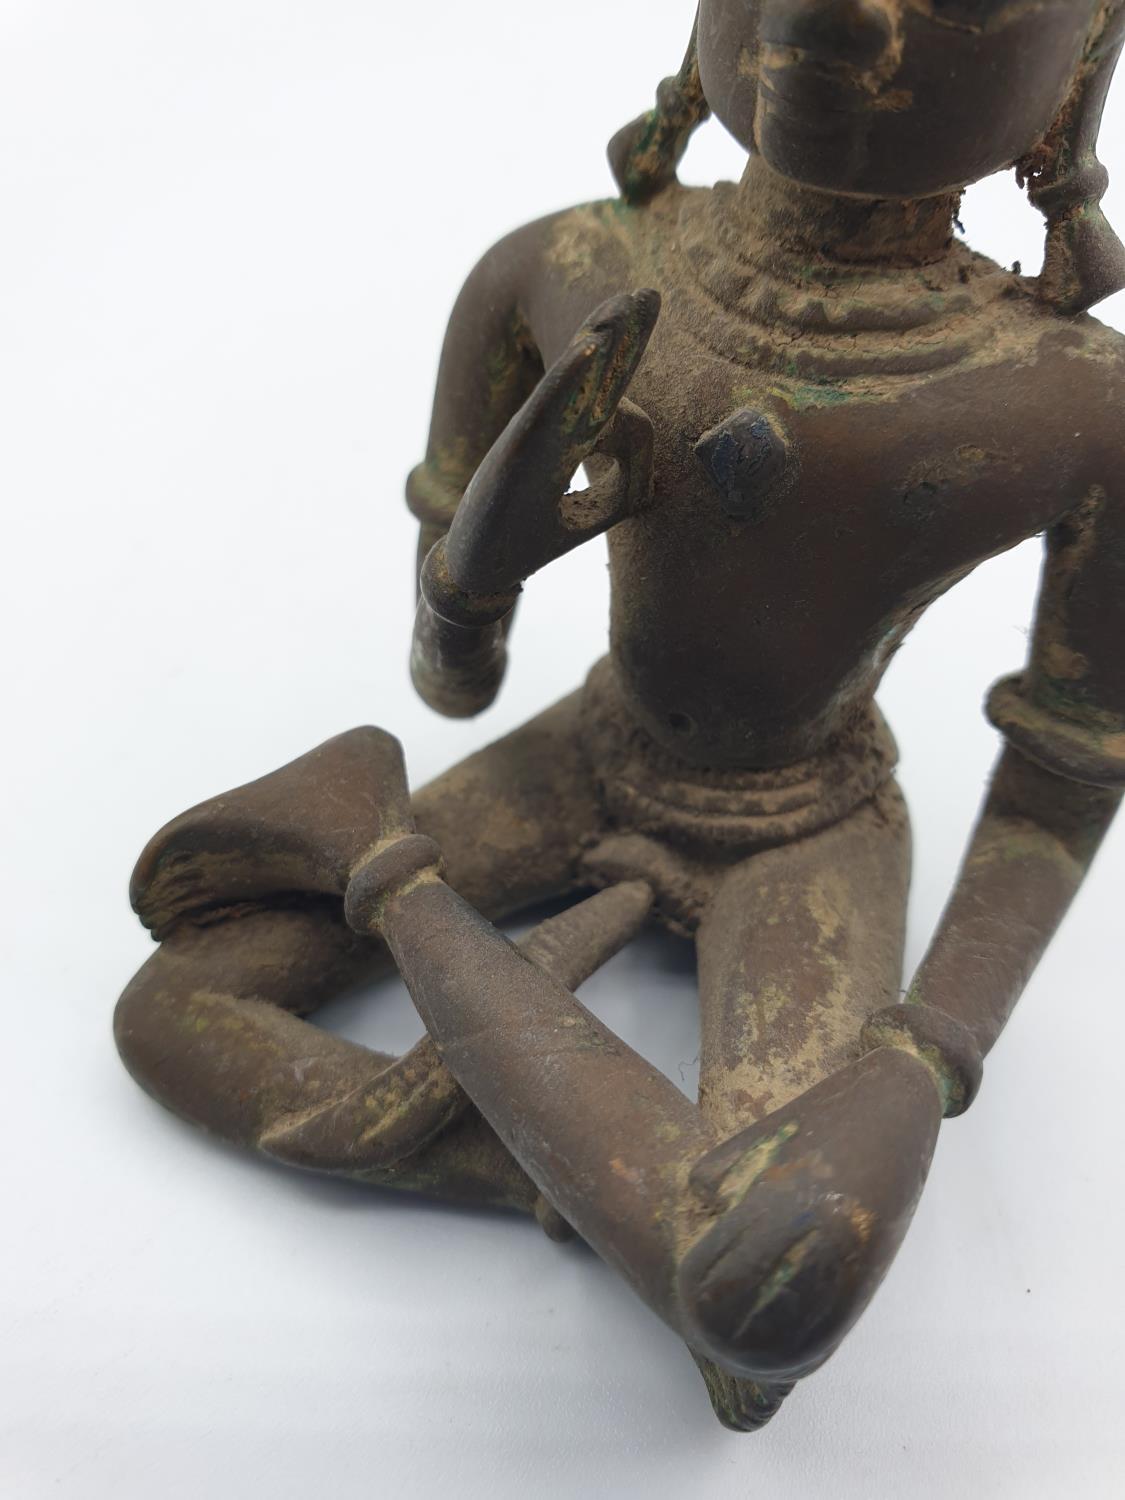 Late 18th century Oriental religious figure in bronze with gilt finish mostly worn off with age, 9cm - Image 6 of 9